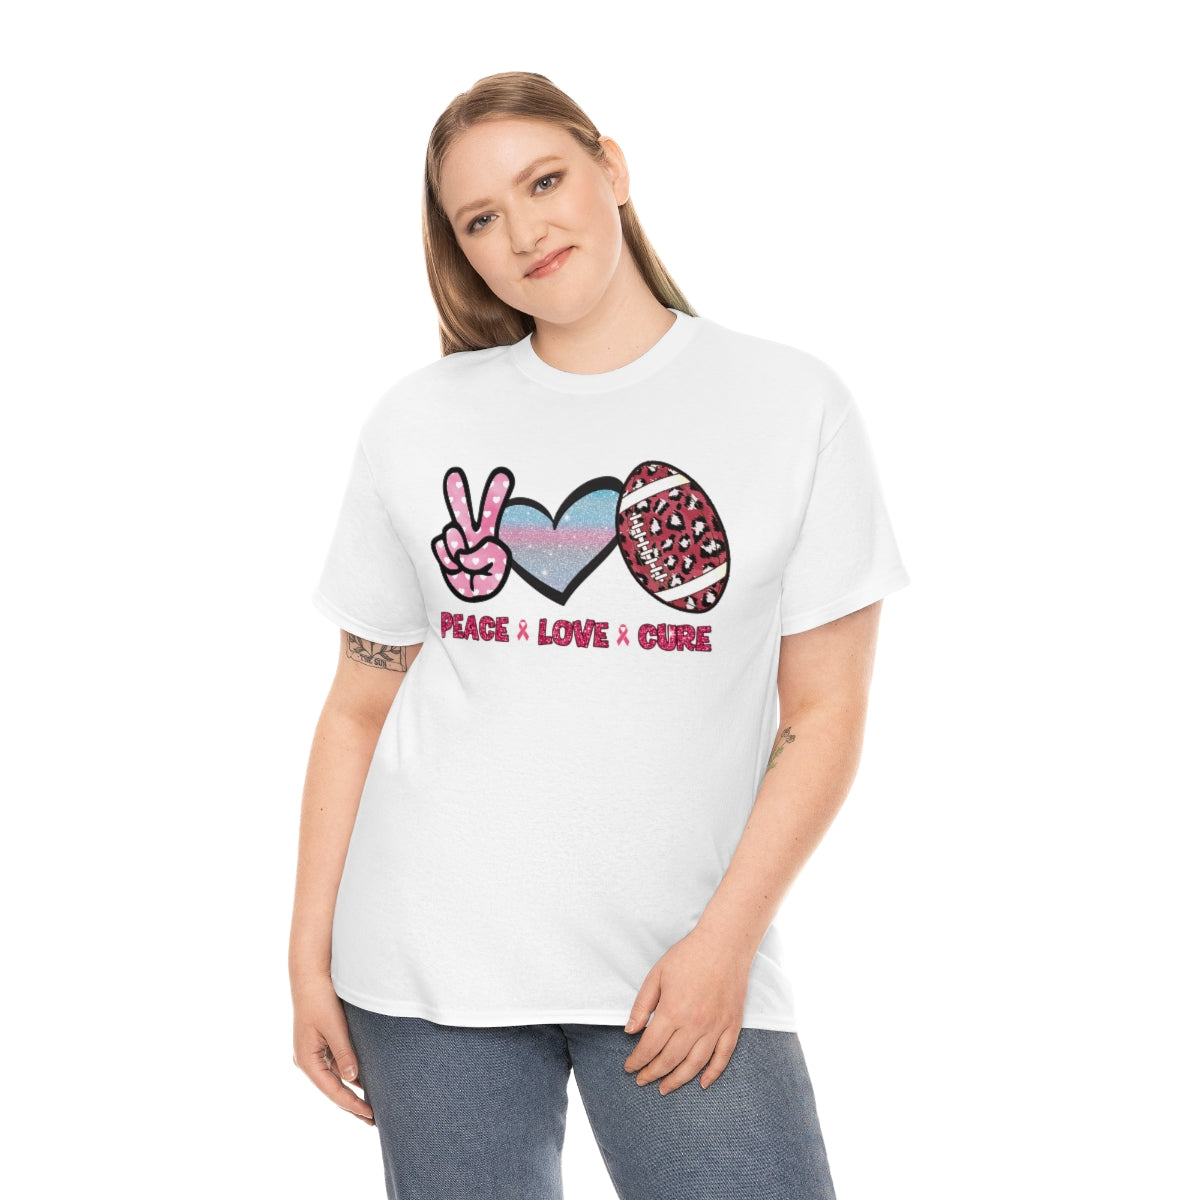 Peace Love Cure Breast Cancer T-shirt| Social Cancer Support Apparel